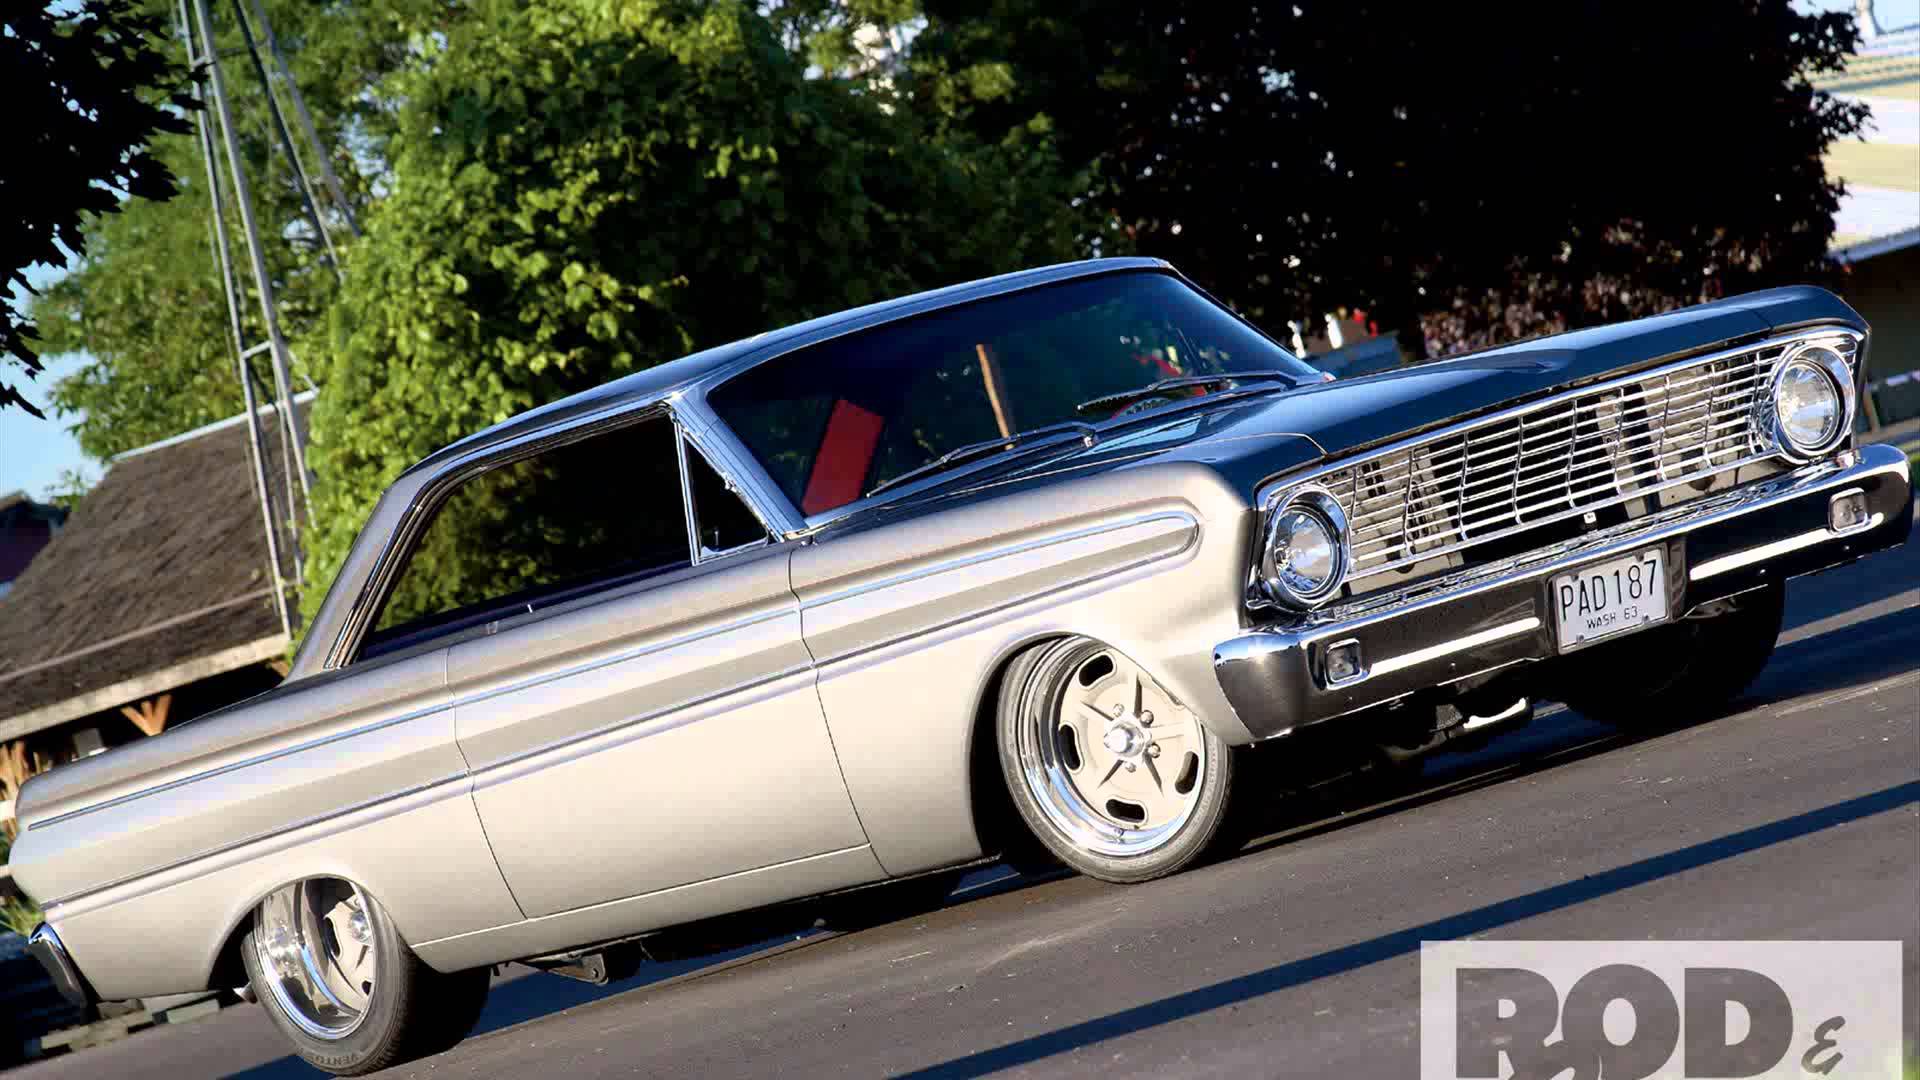 Amazing 1964 Ford Falcon Pictures & Backgrounds